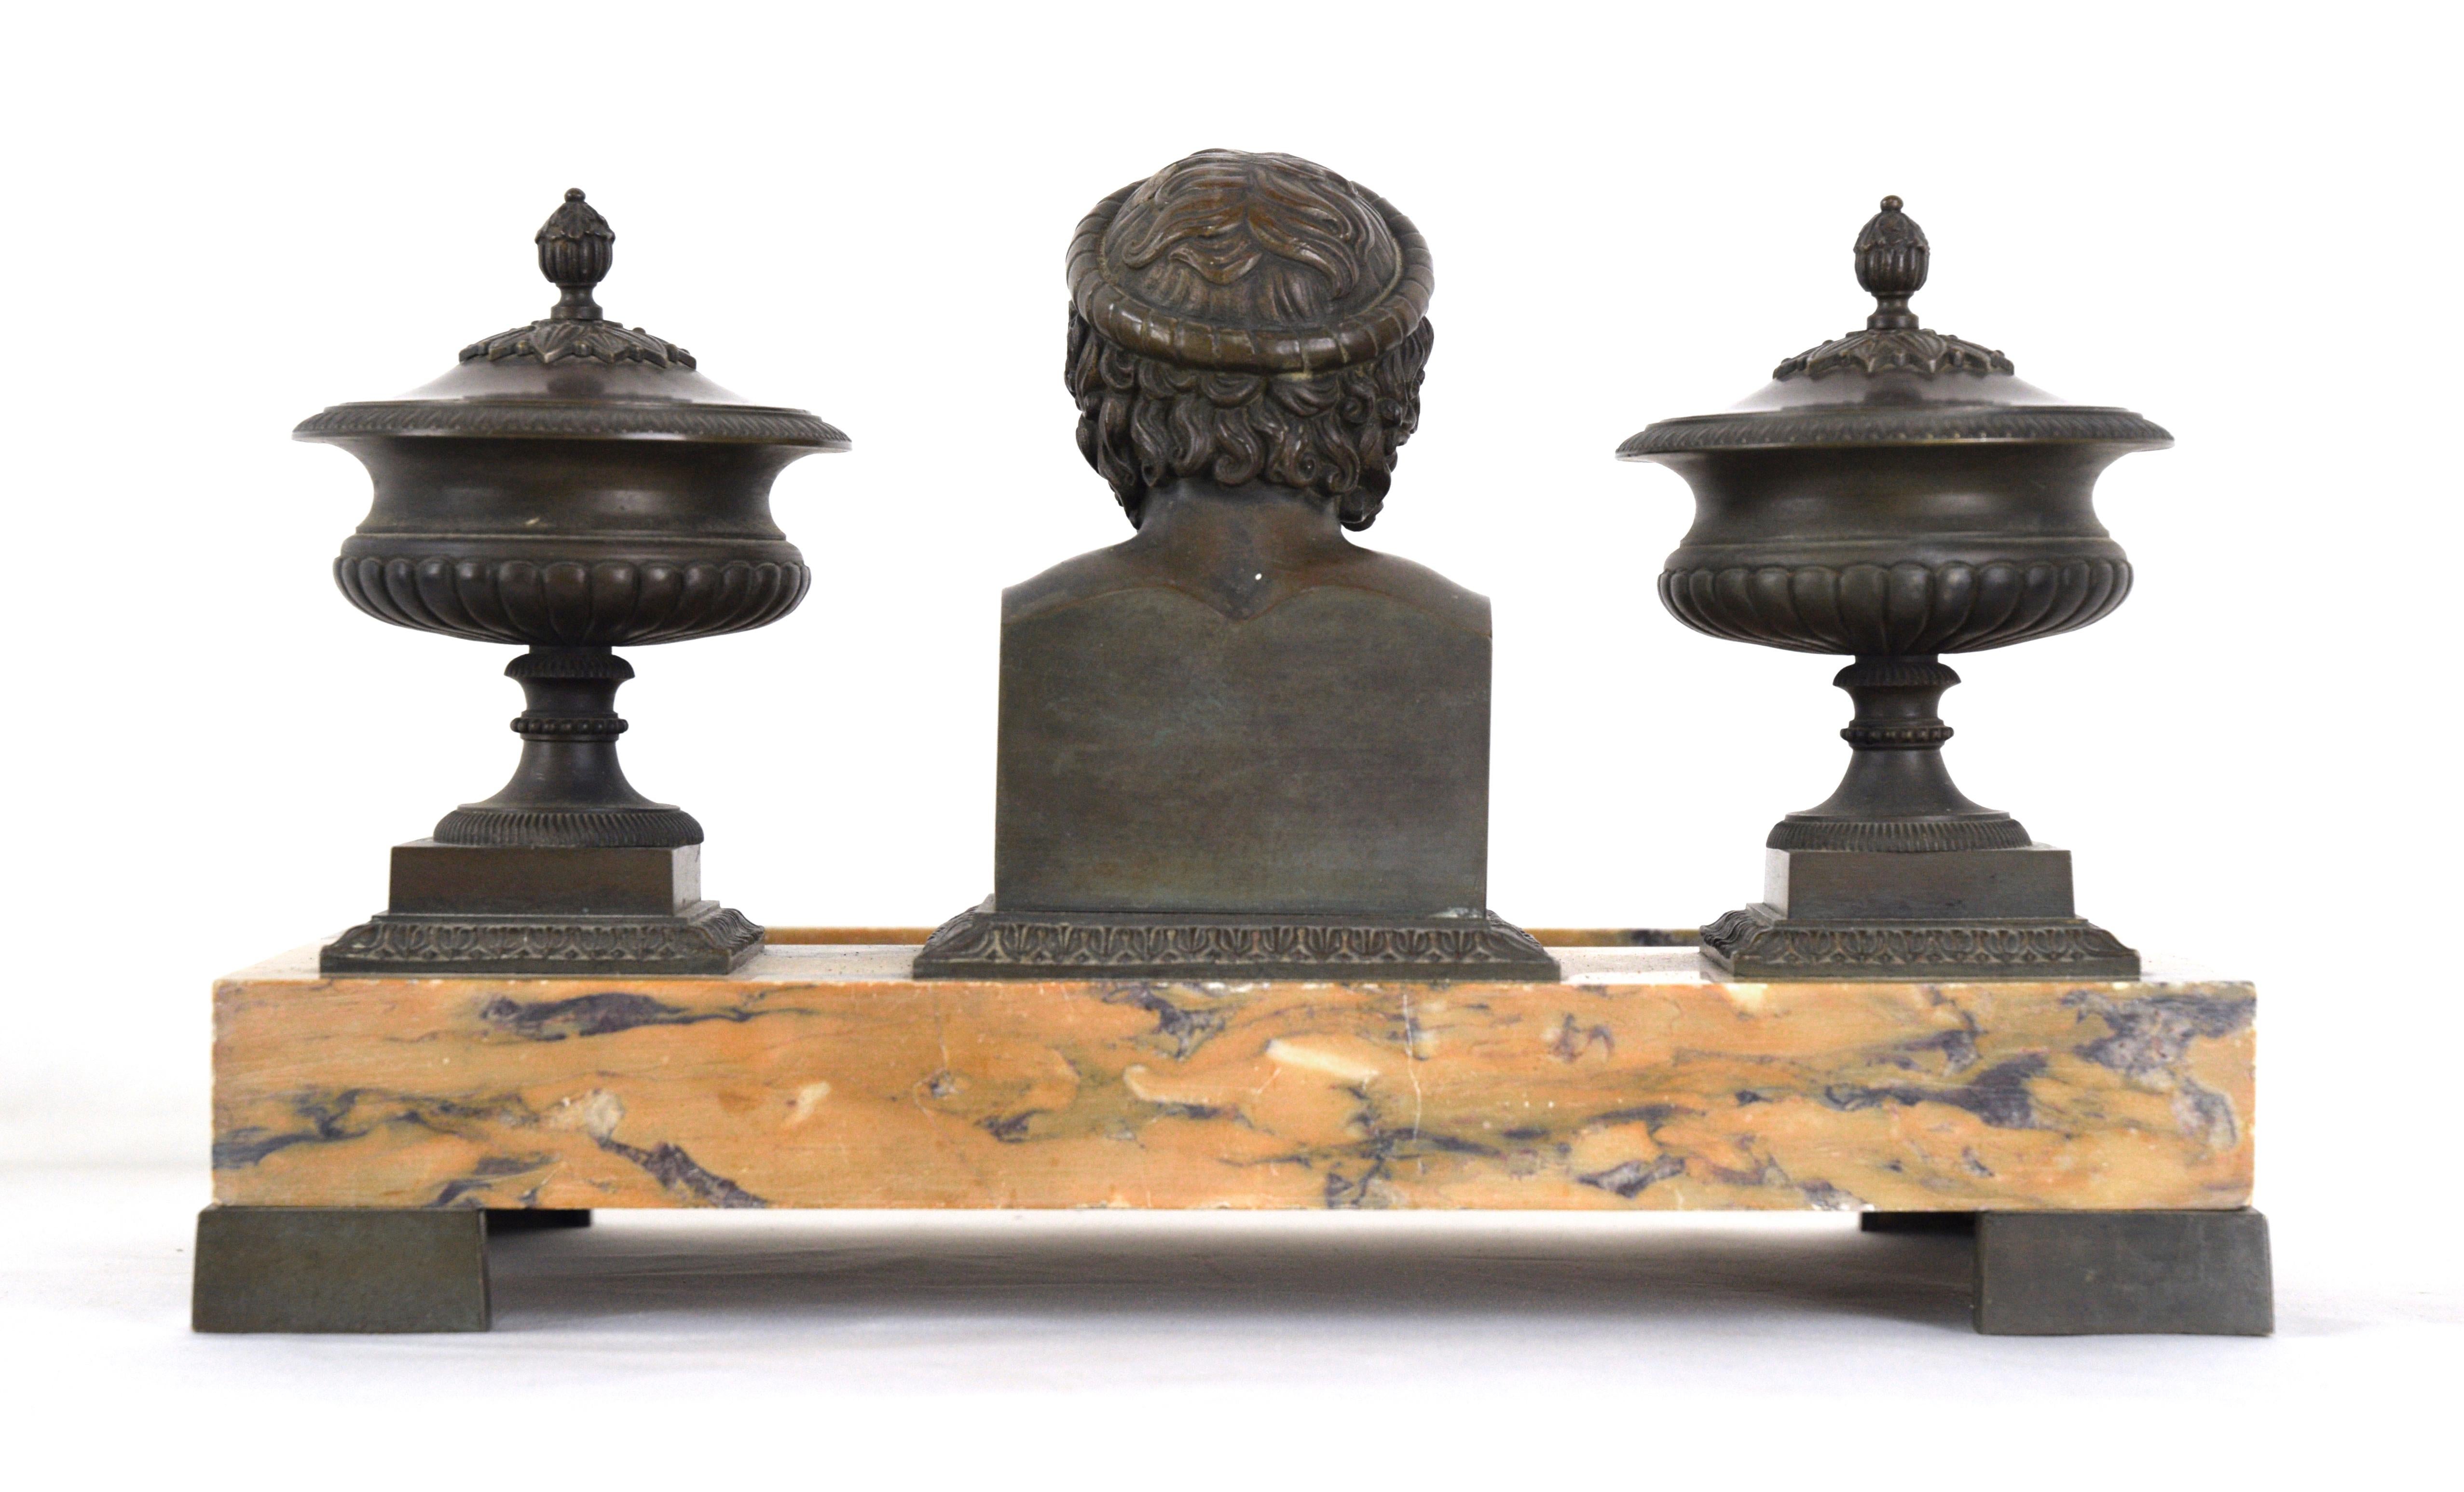 Siena Marble 19th Century Bronze and Sienna Marble Inkwell with Bust of Hippocrates